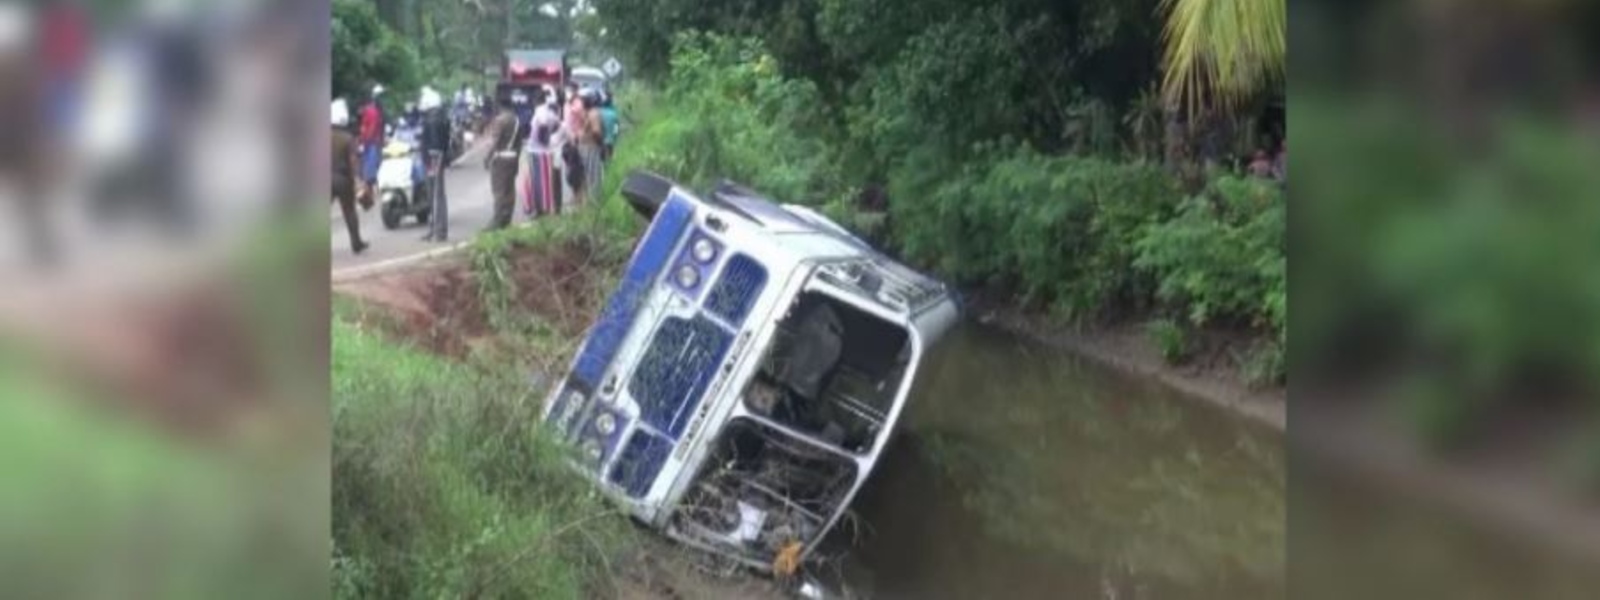 30 INJURED AFTER BUS CRASH INTO CANAL